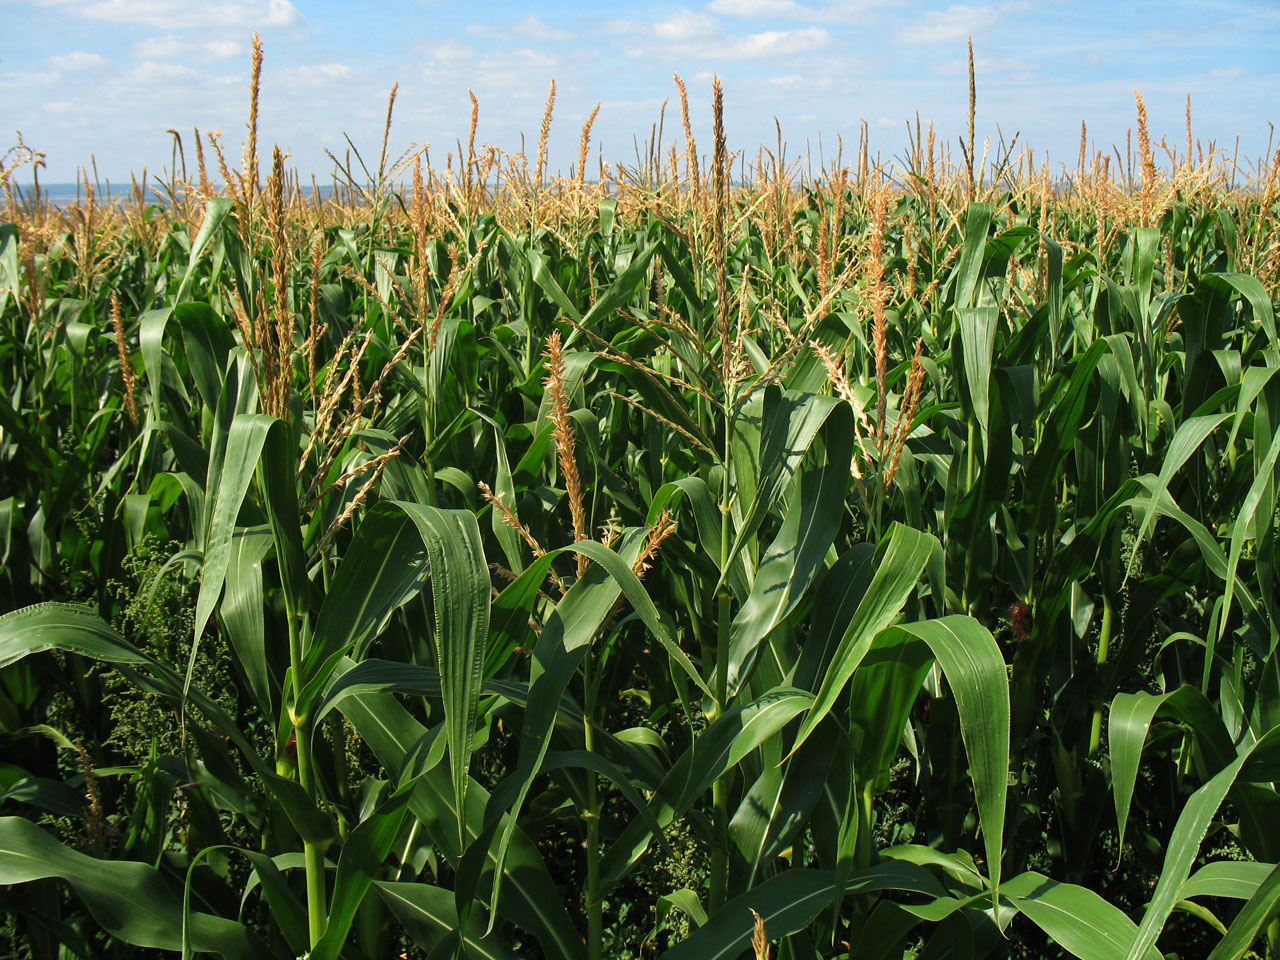 Farmers Encouraged to Participate in Crop Surveys, to Help NASS Fairly Determine Program Payouts